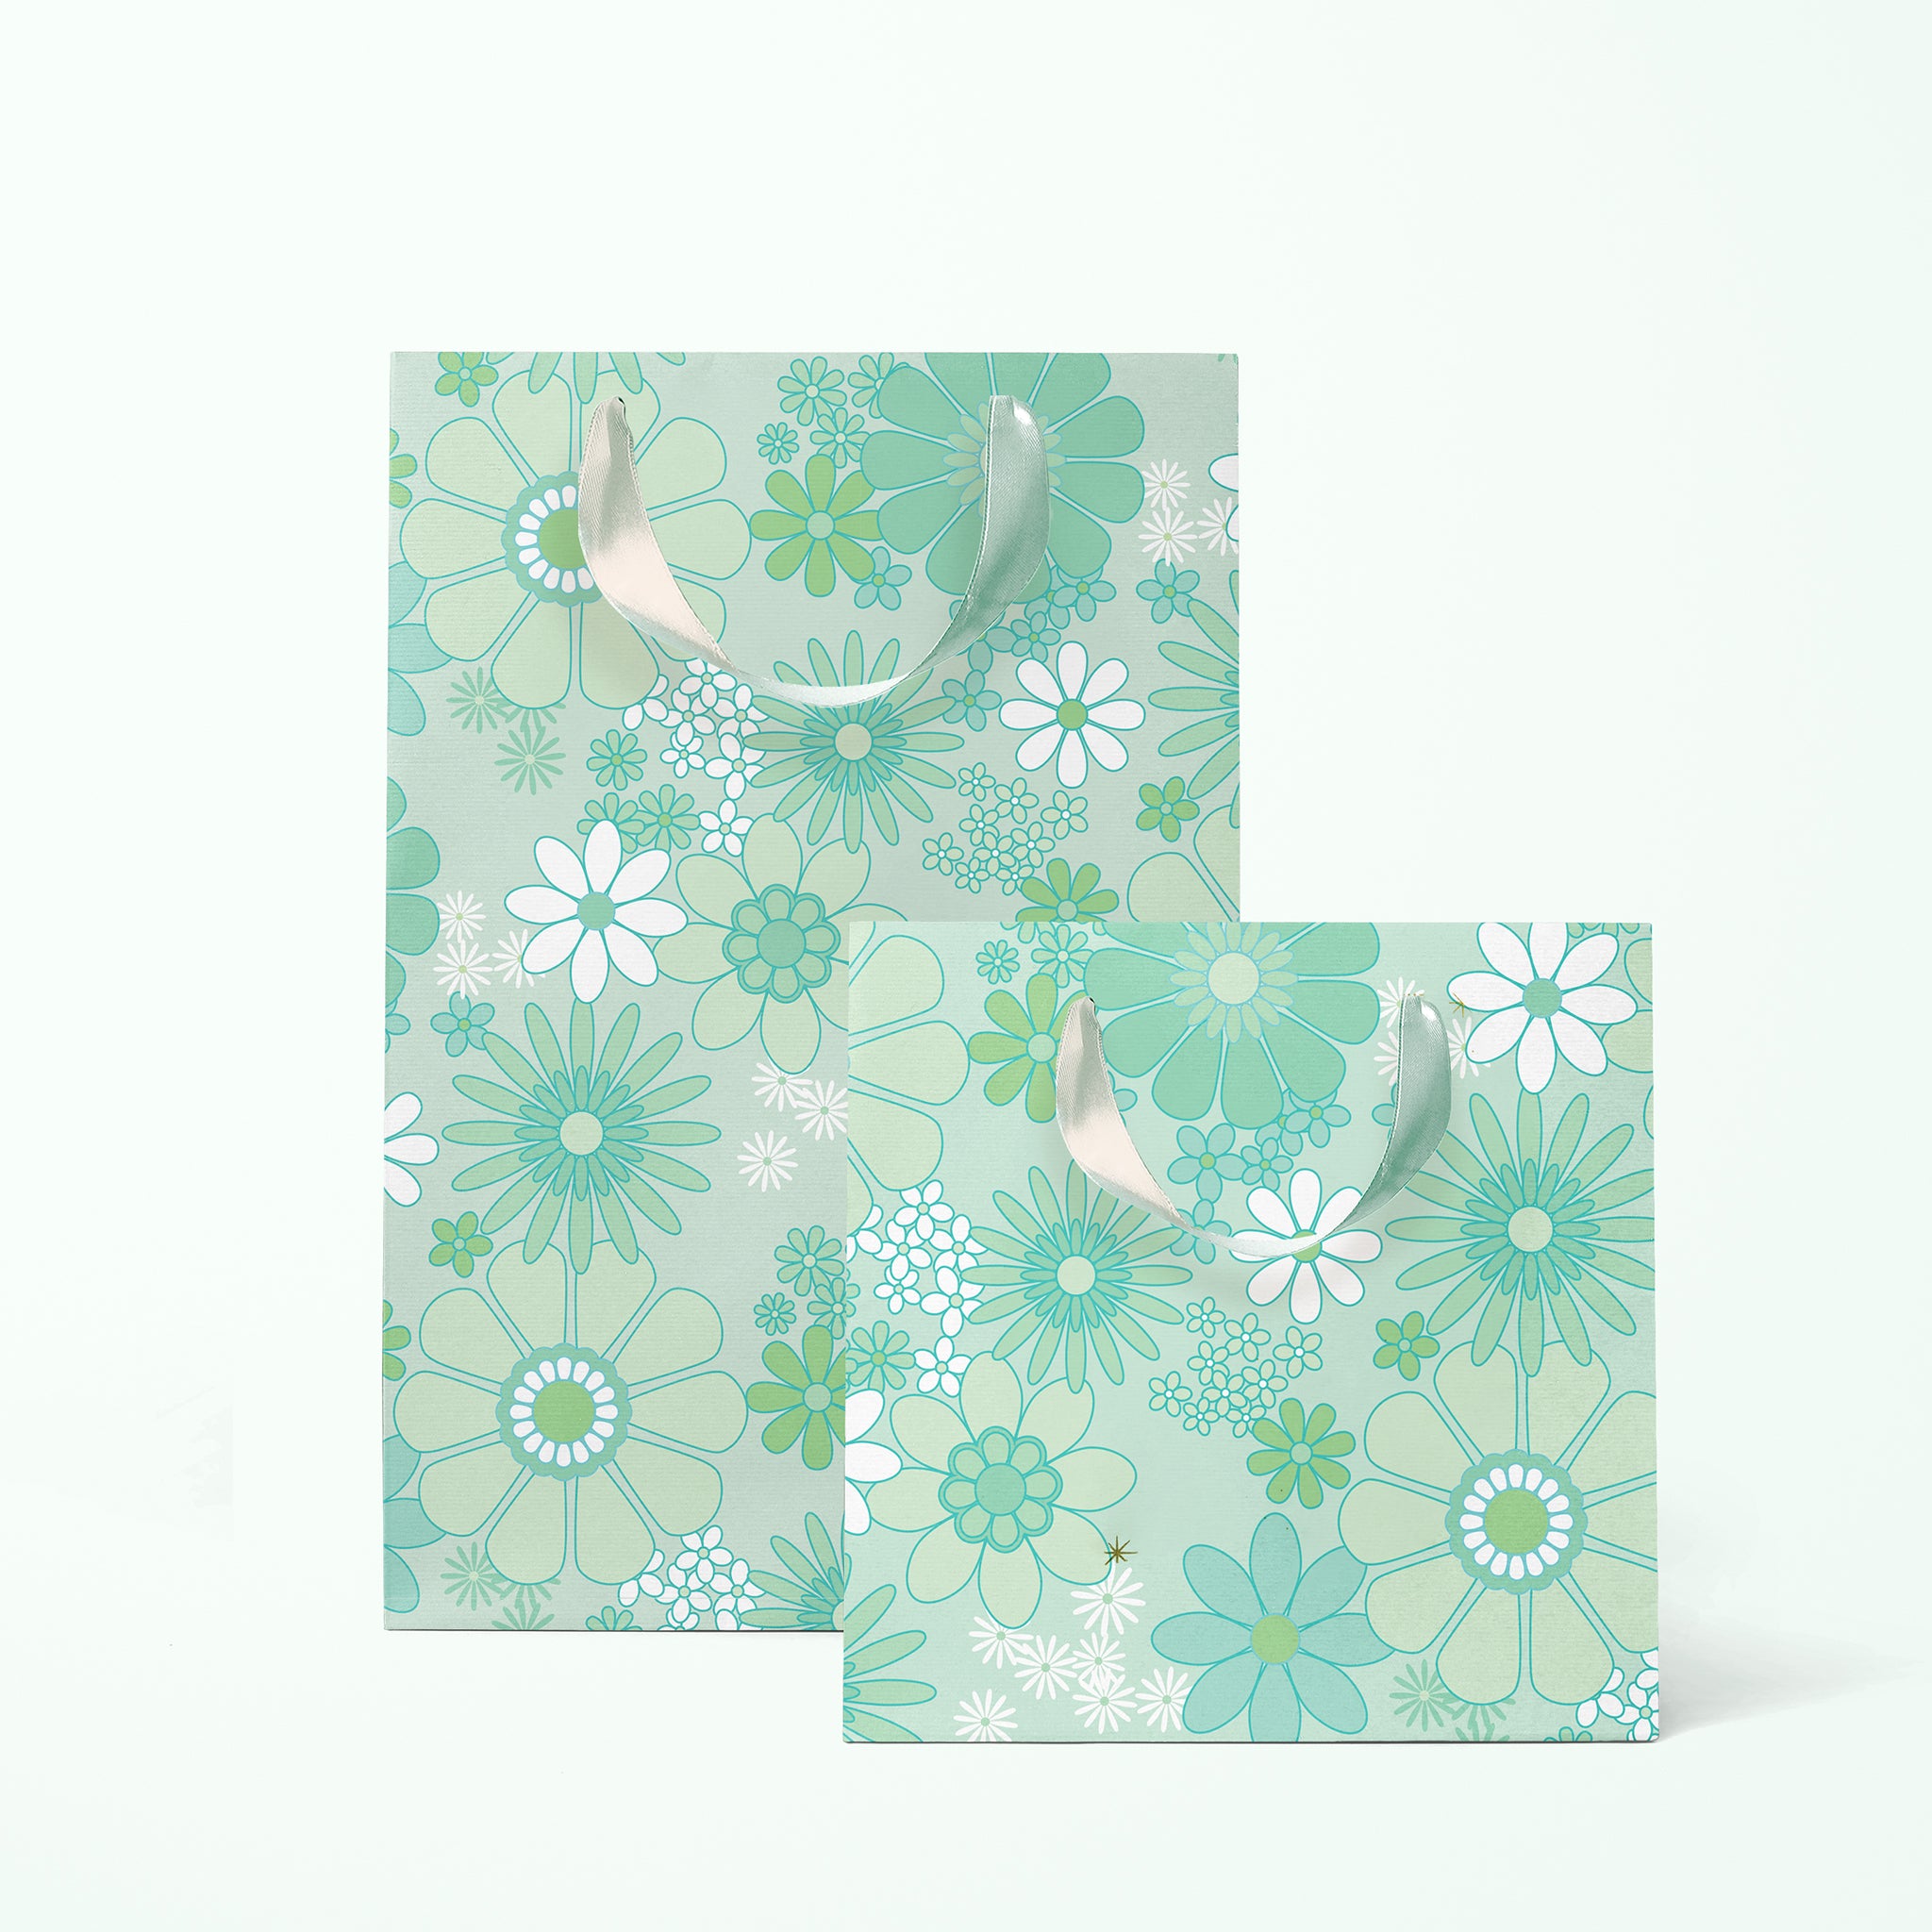 On a white background is a rendering of two gift bags with a mint and white floral print and ribbon handles. 